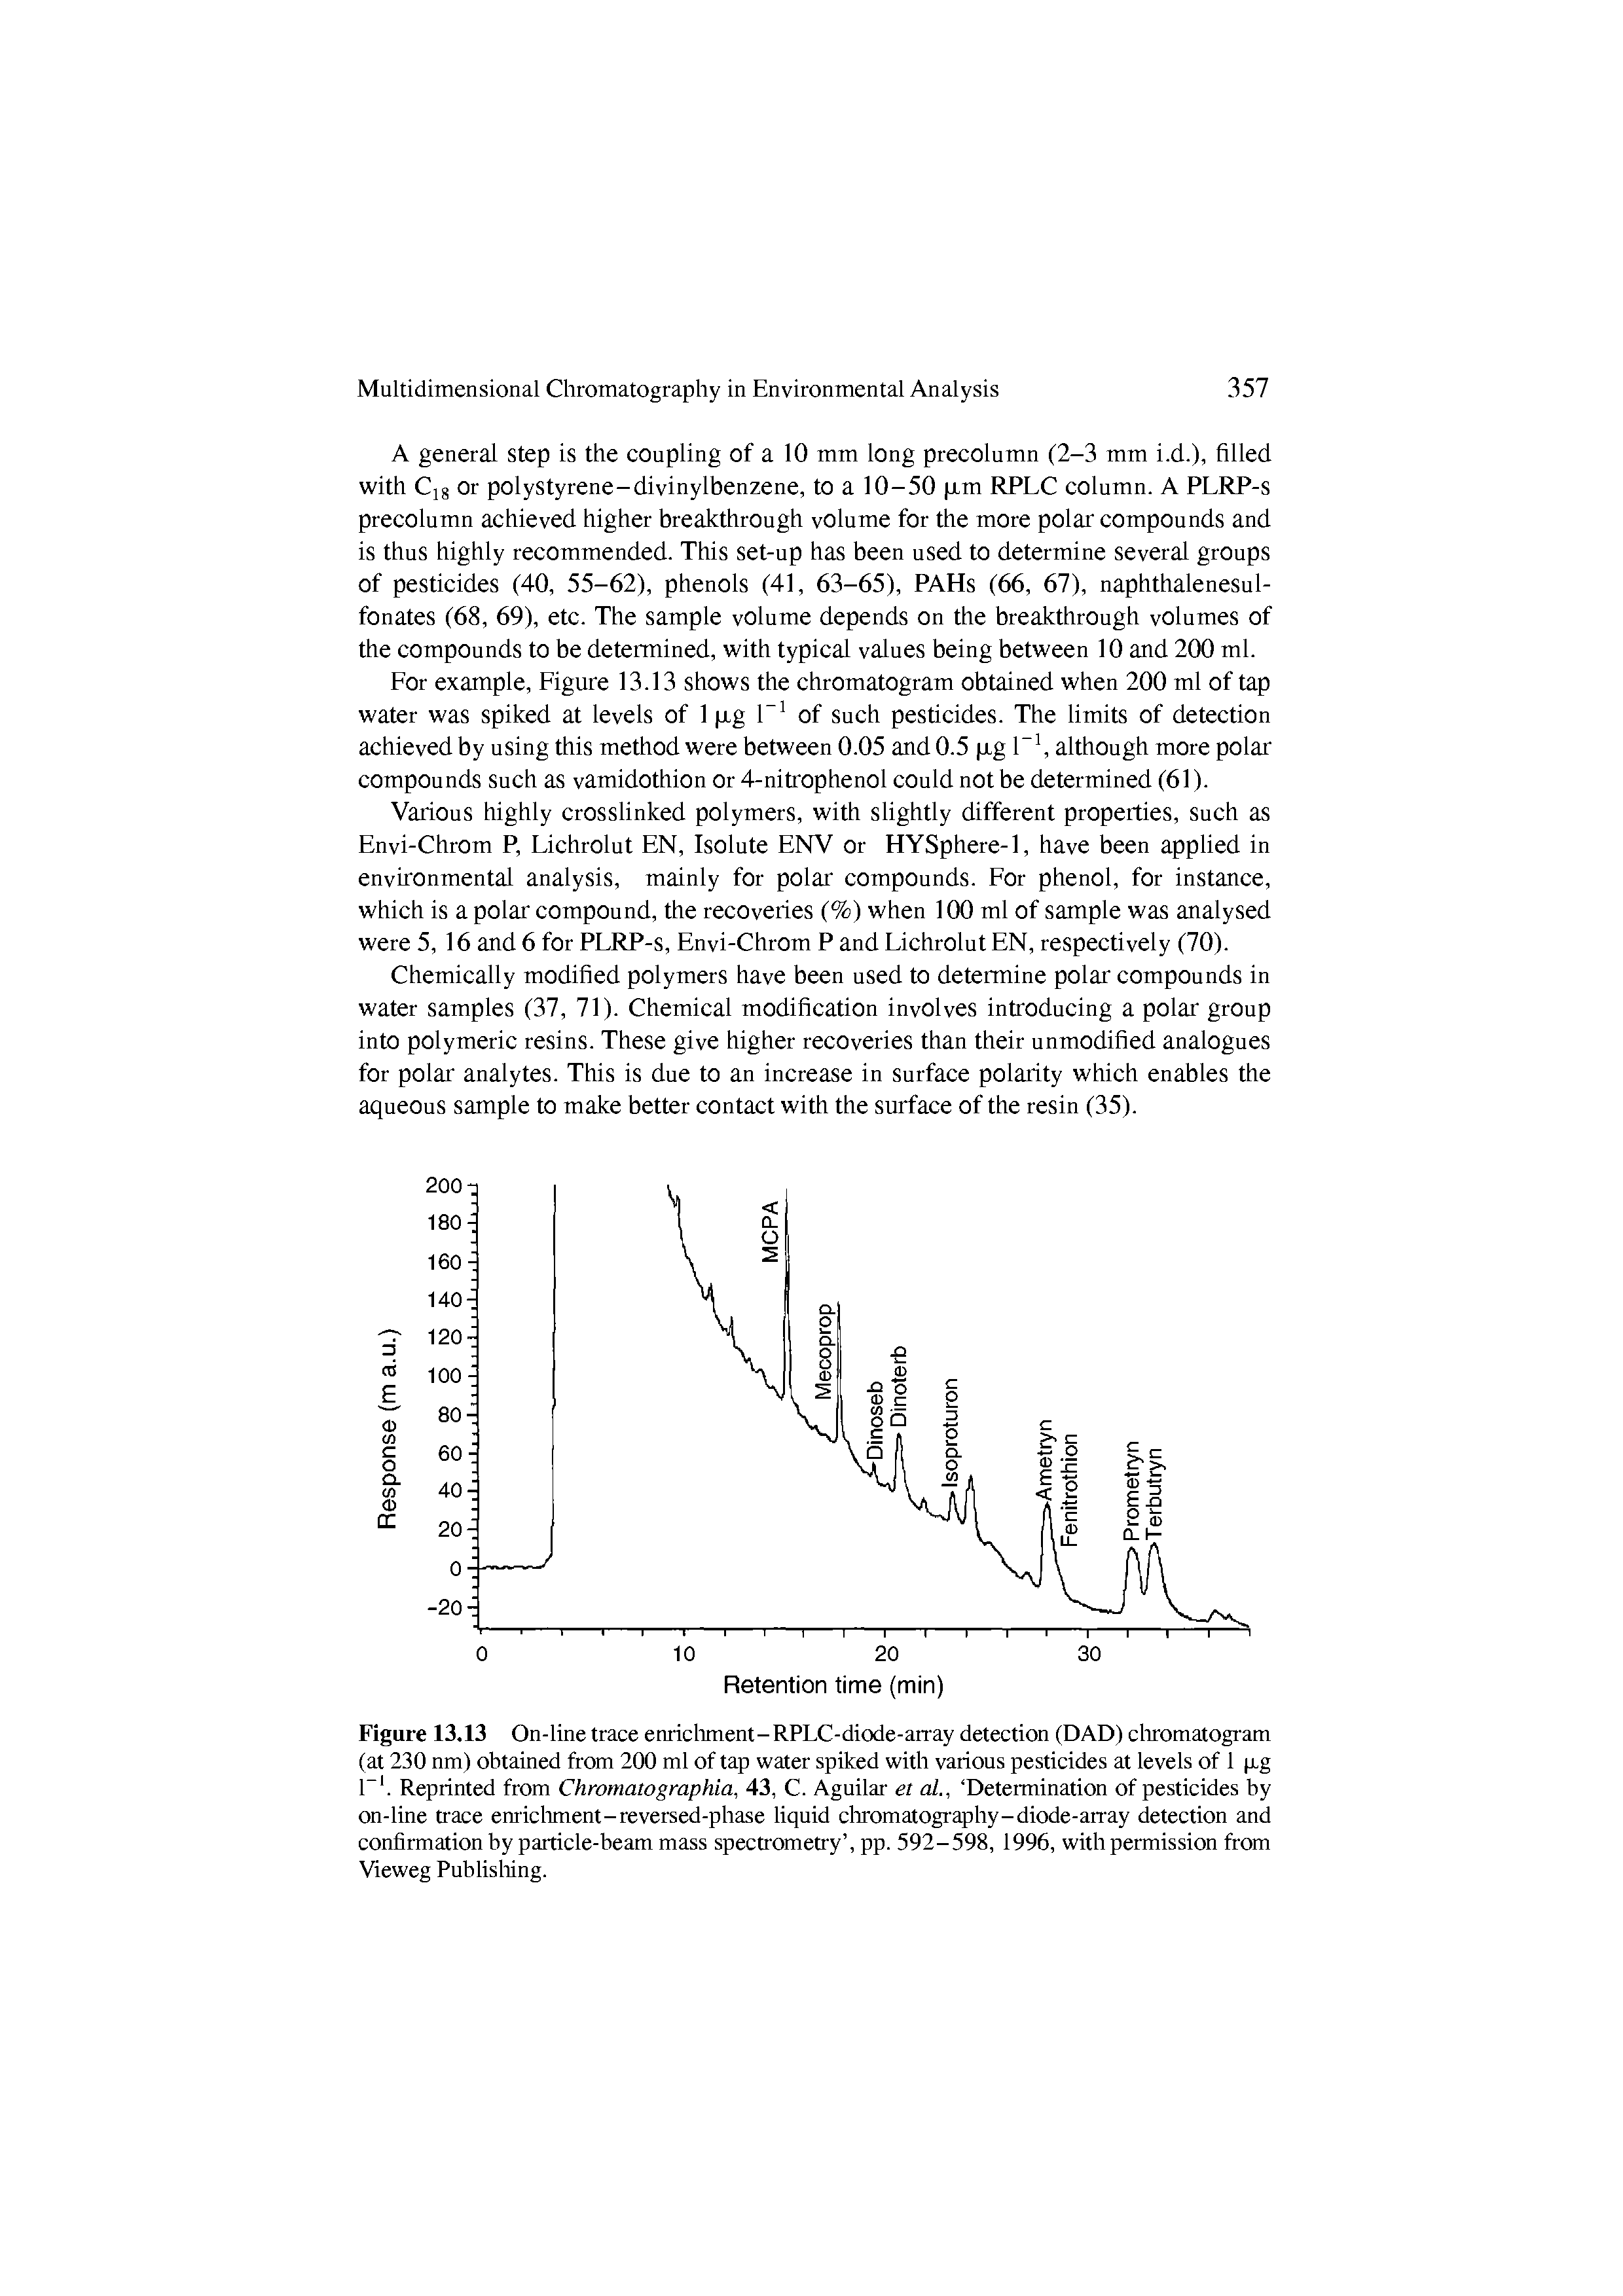 Figure 13.13 On-line trace eniicliment-RPLC-diode-aiTay detection (DAD) cliromatogram (at 230 nm) obtained from 200 ml of tap water spiked with various pesticides at levels of 1 p.g L. Reprinted from Chromatographia, 43, C. Aguilar et al., Deteimination of pesticides by on-line ti ace emicliment-reversed-phase liquid clrromatography-diode-aiTay detection and confirmation by paiticle-beam mass specti ometi y , pp. 592-598, 1996, with permission from Vieweg Publisliing.